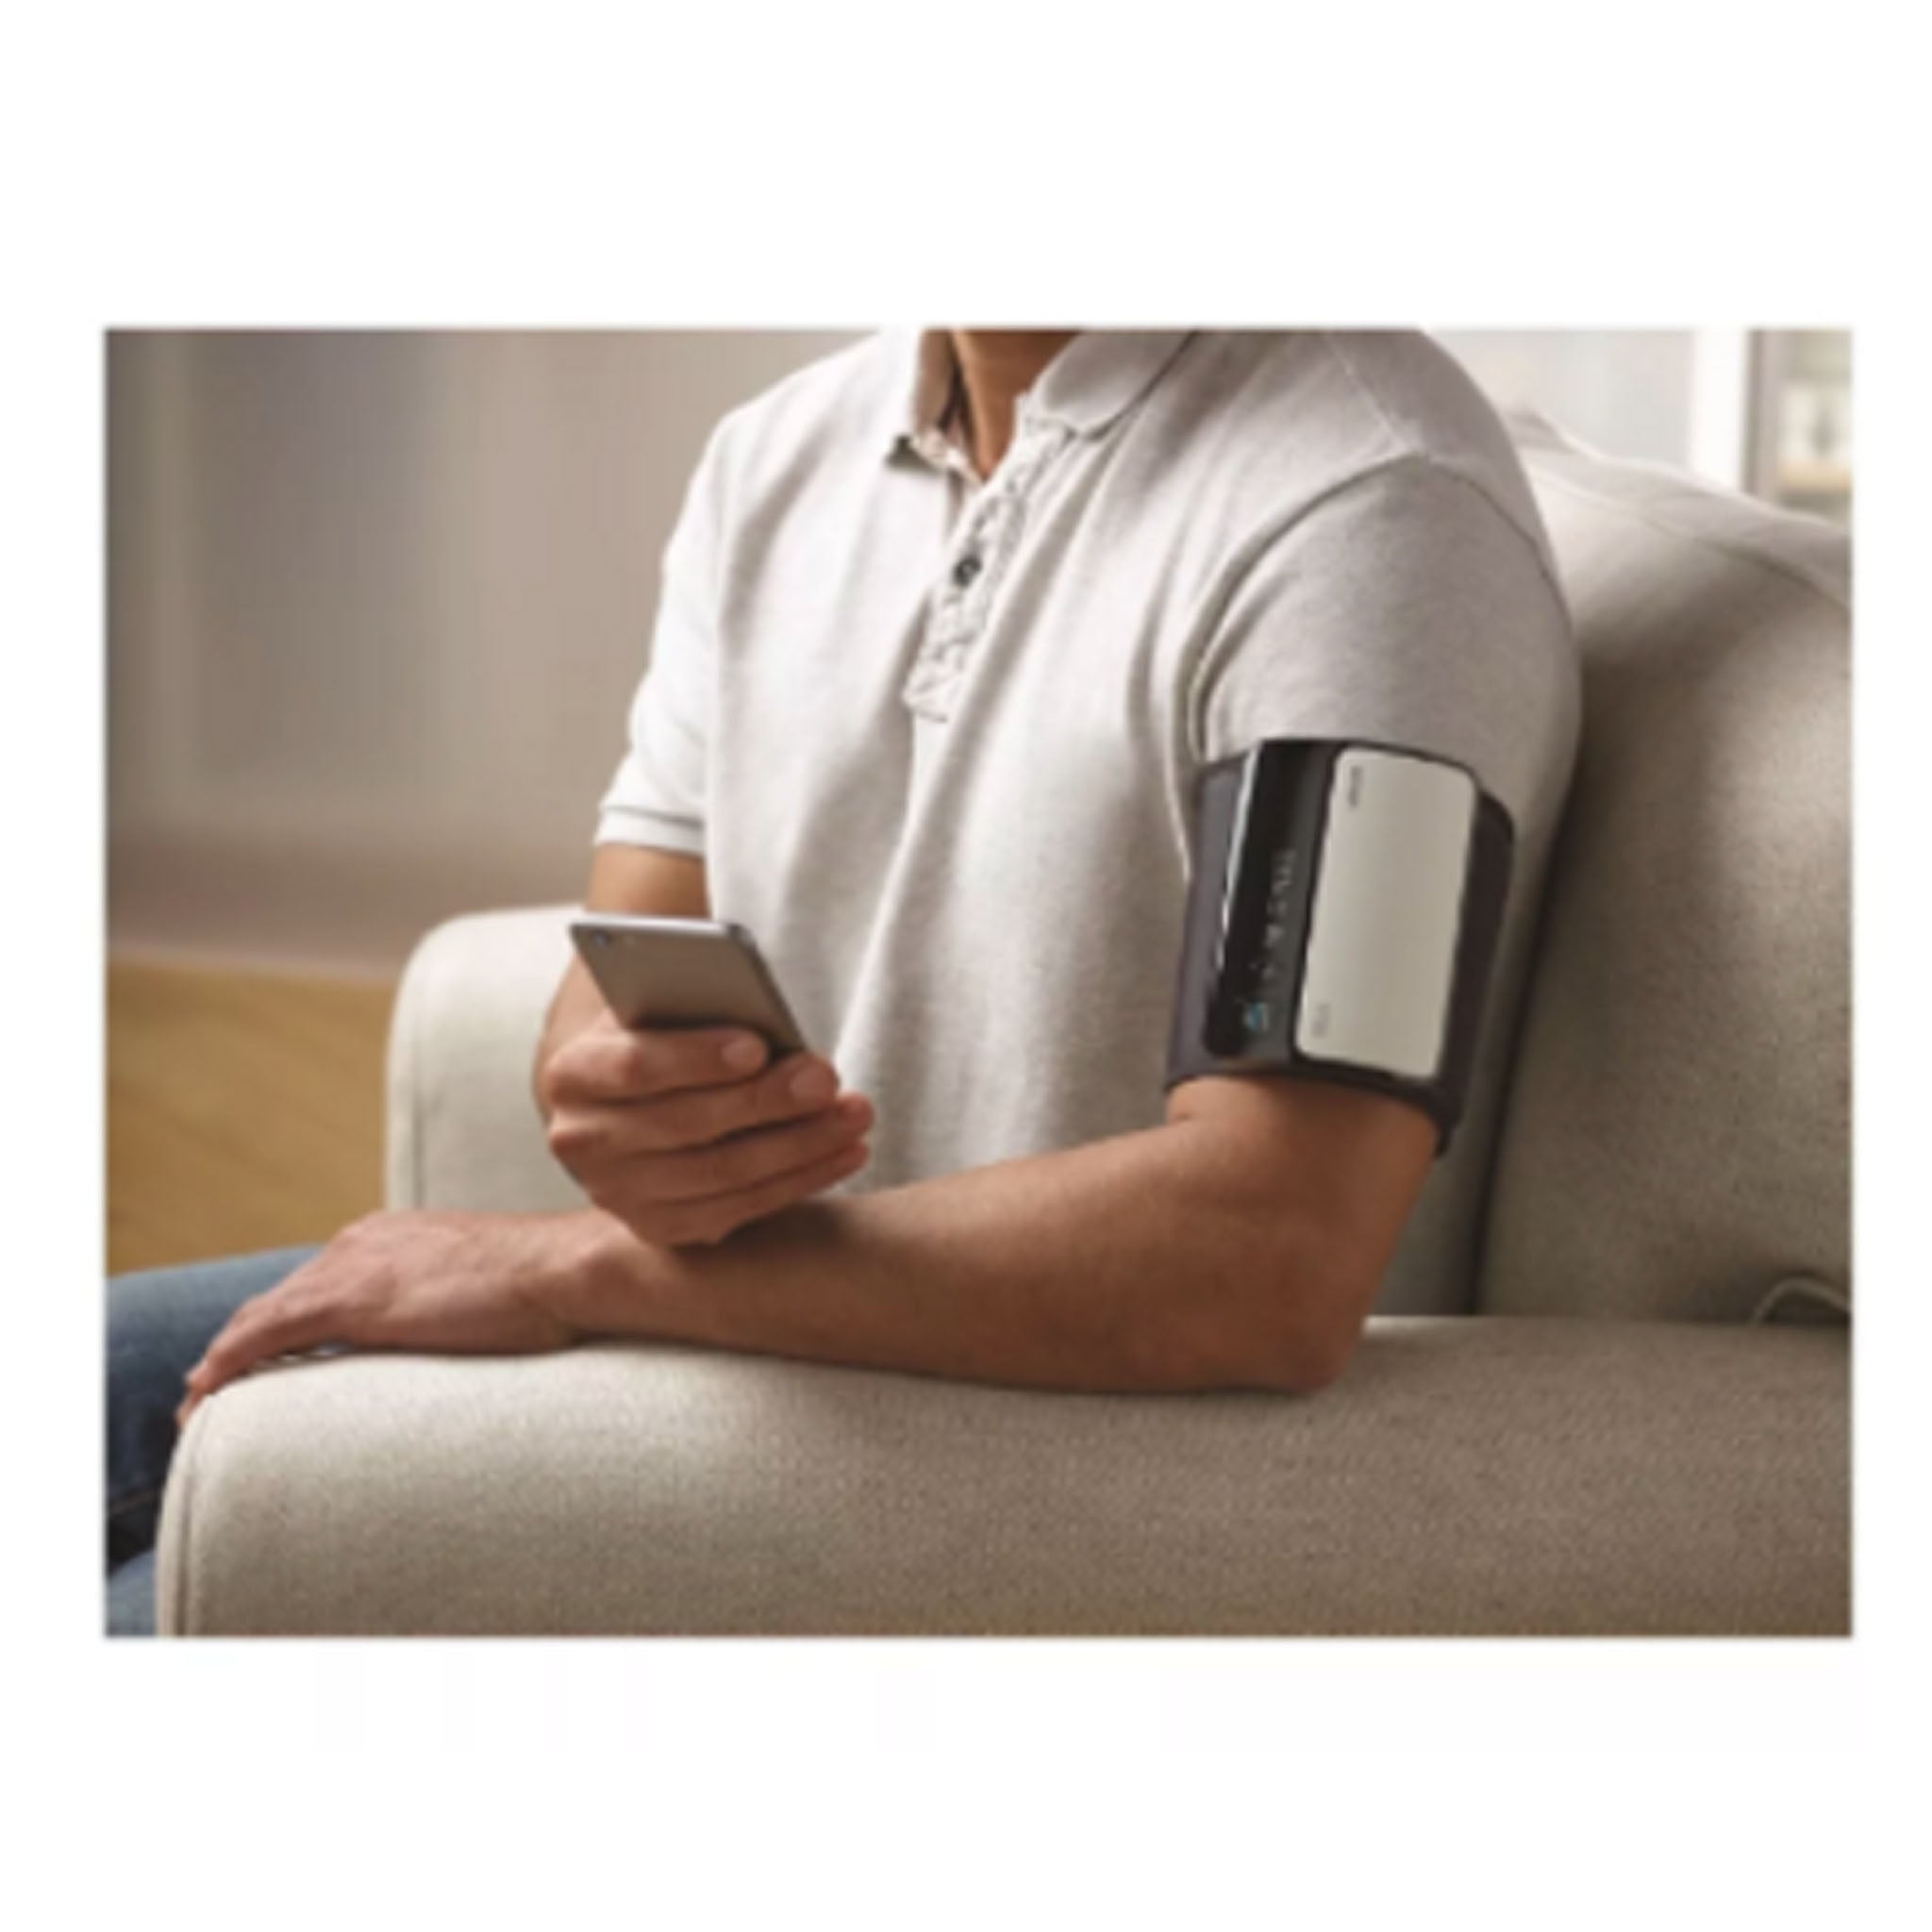 Omron Evolv Connected Upper Arm Blood Pressure Monitor